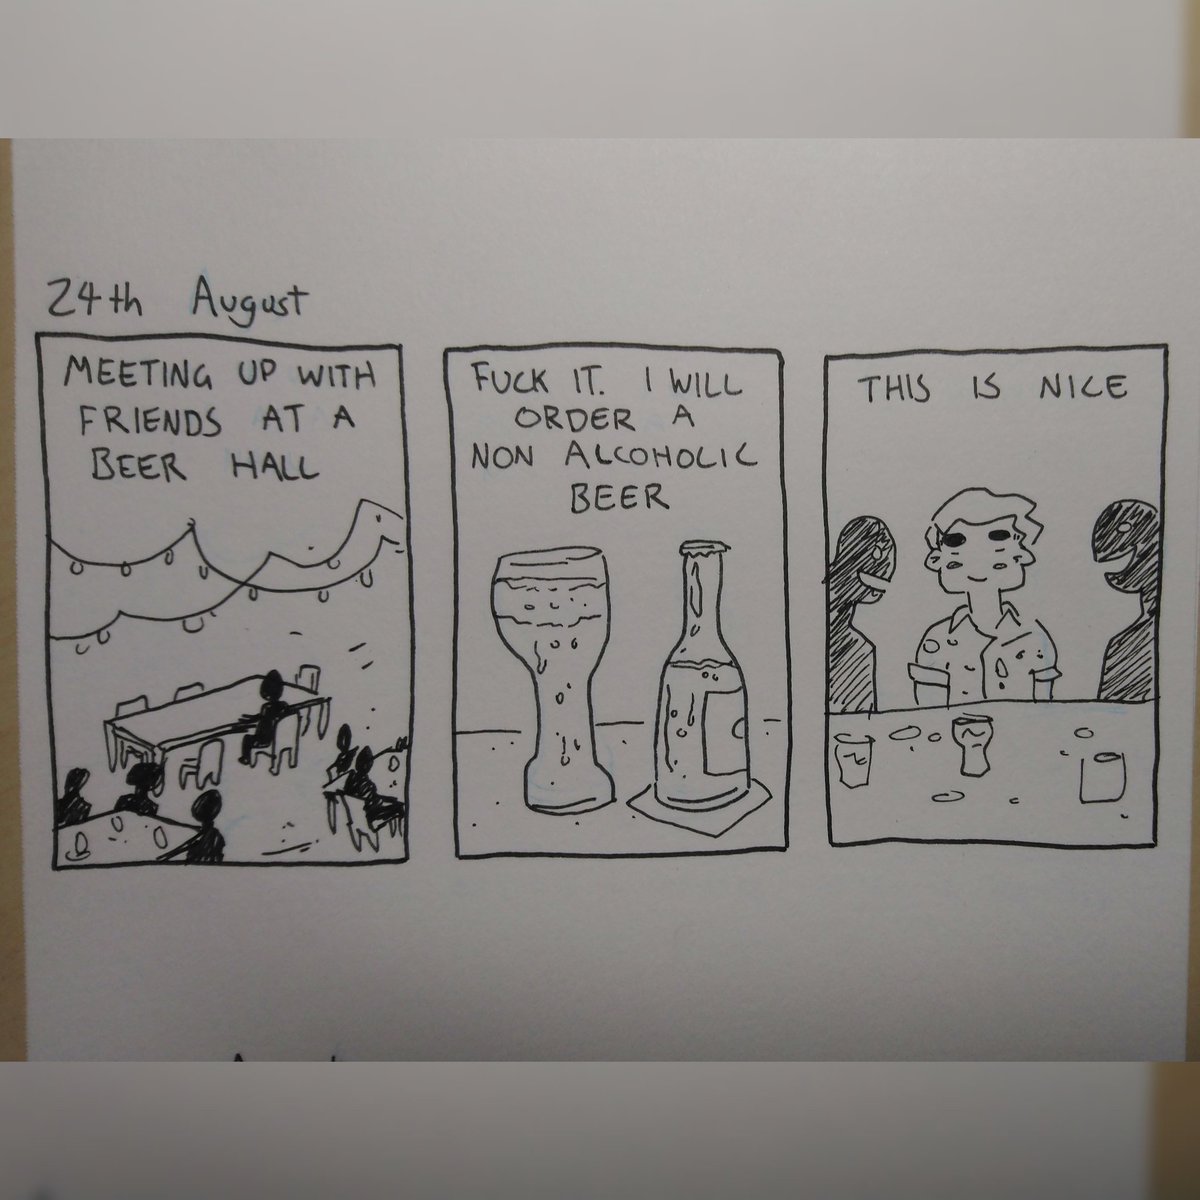 It is just pleasant. I wish the selection was nicer though. #nonalcoholic #comic #onthewagon